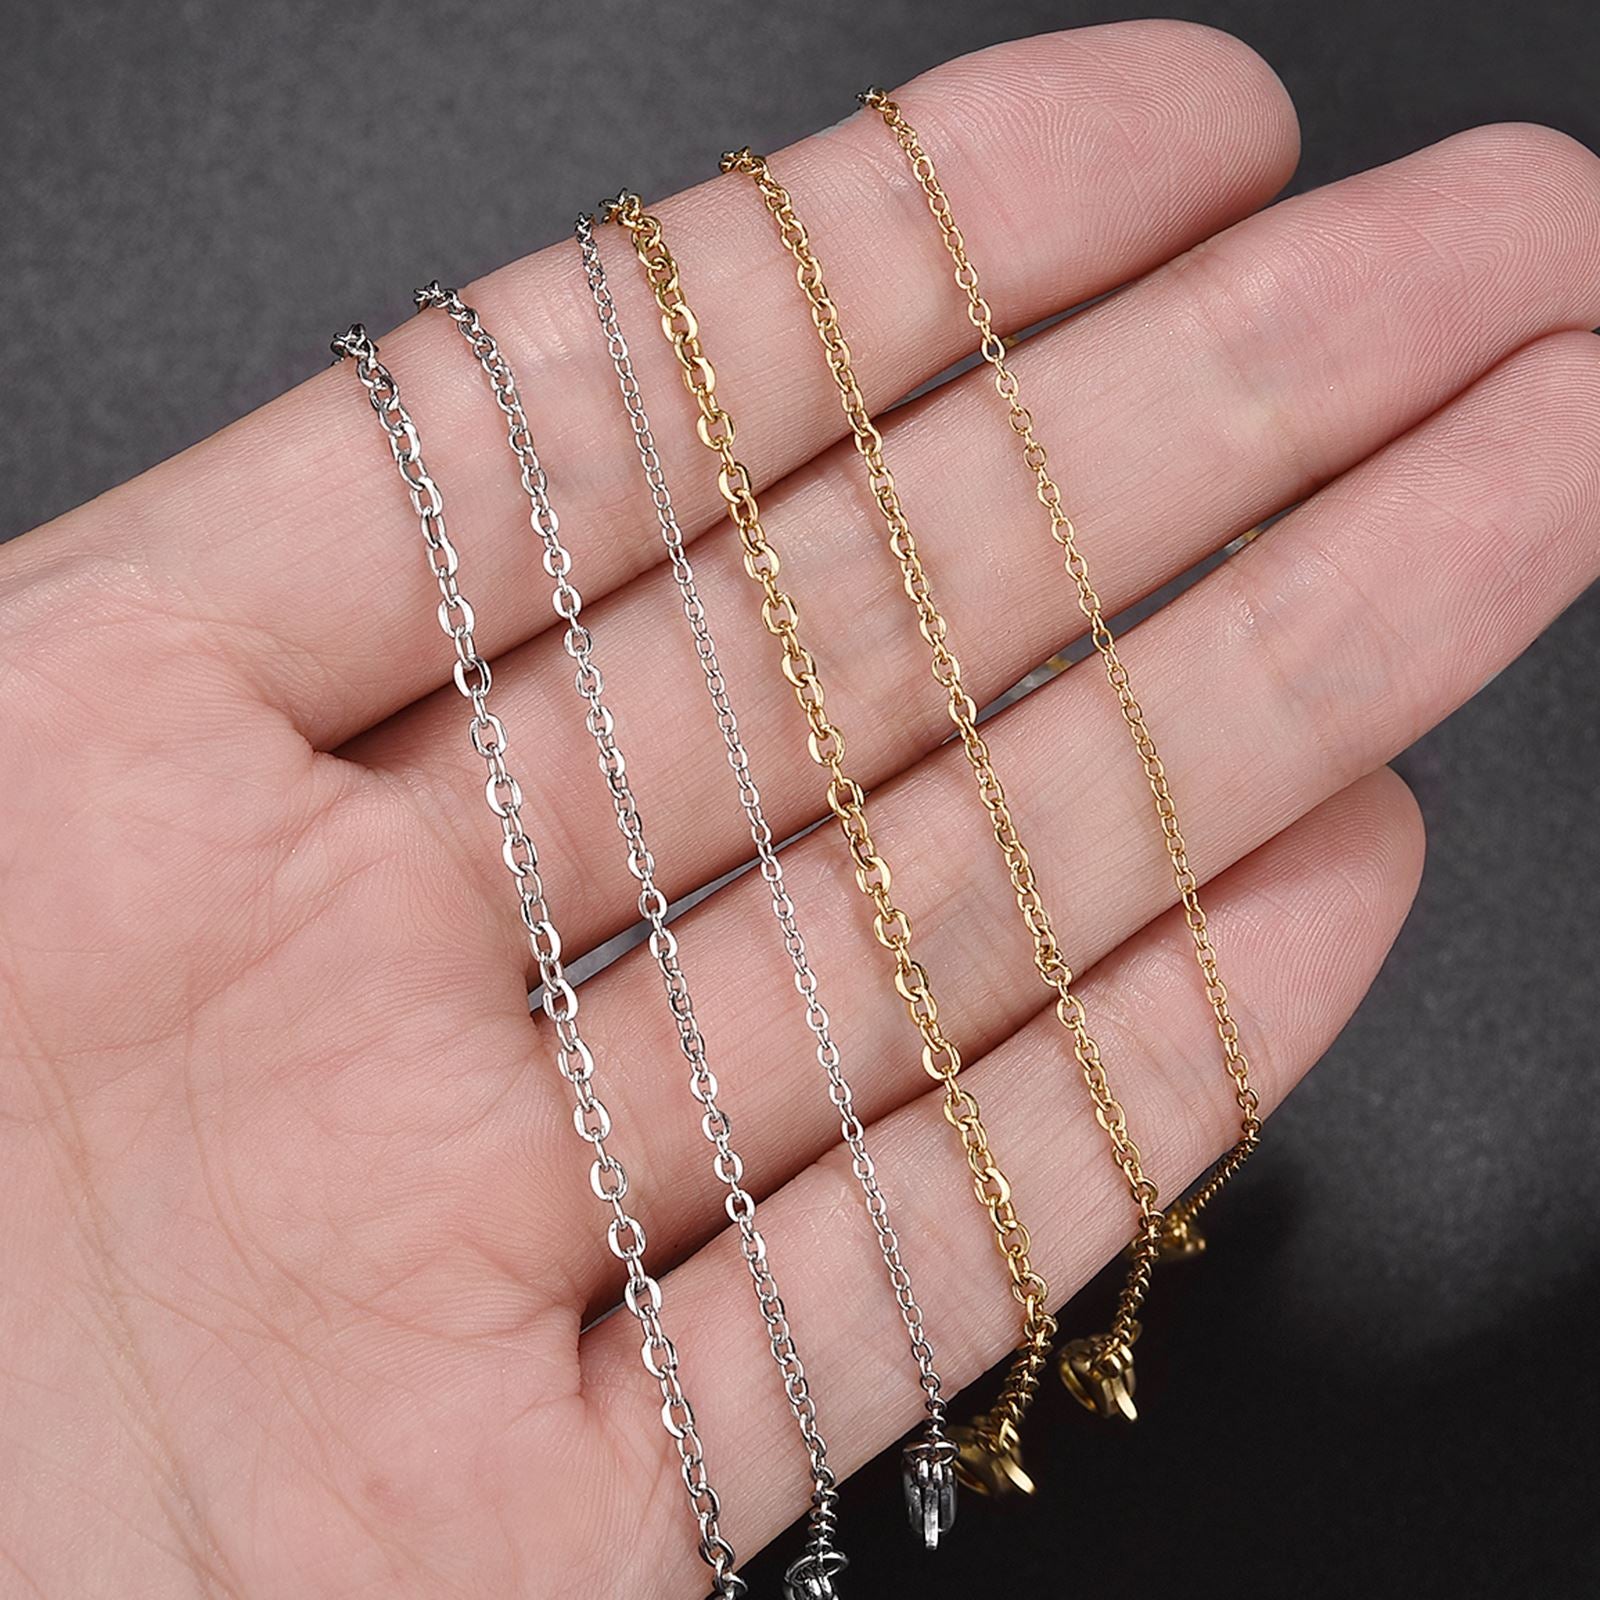 10pcs Gold Color Stainless Steel Link 45/50/55/60CM Bulk Necklace Chains Jewelry Cuban Chains Wholesale Chain Chokers DIY Crafts